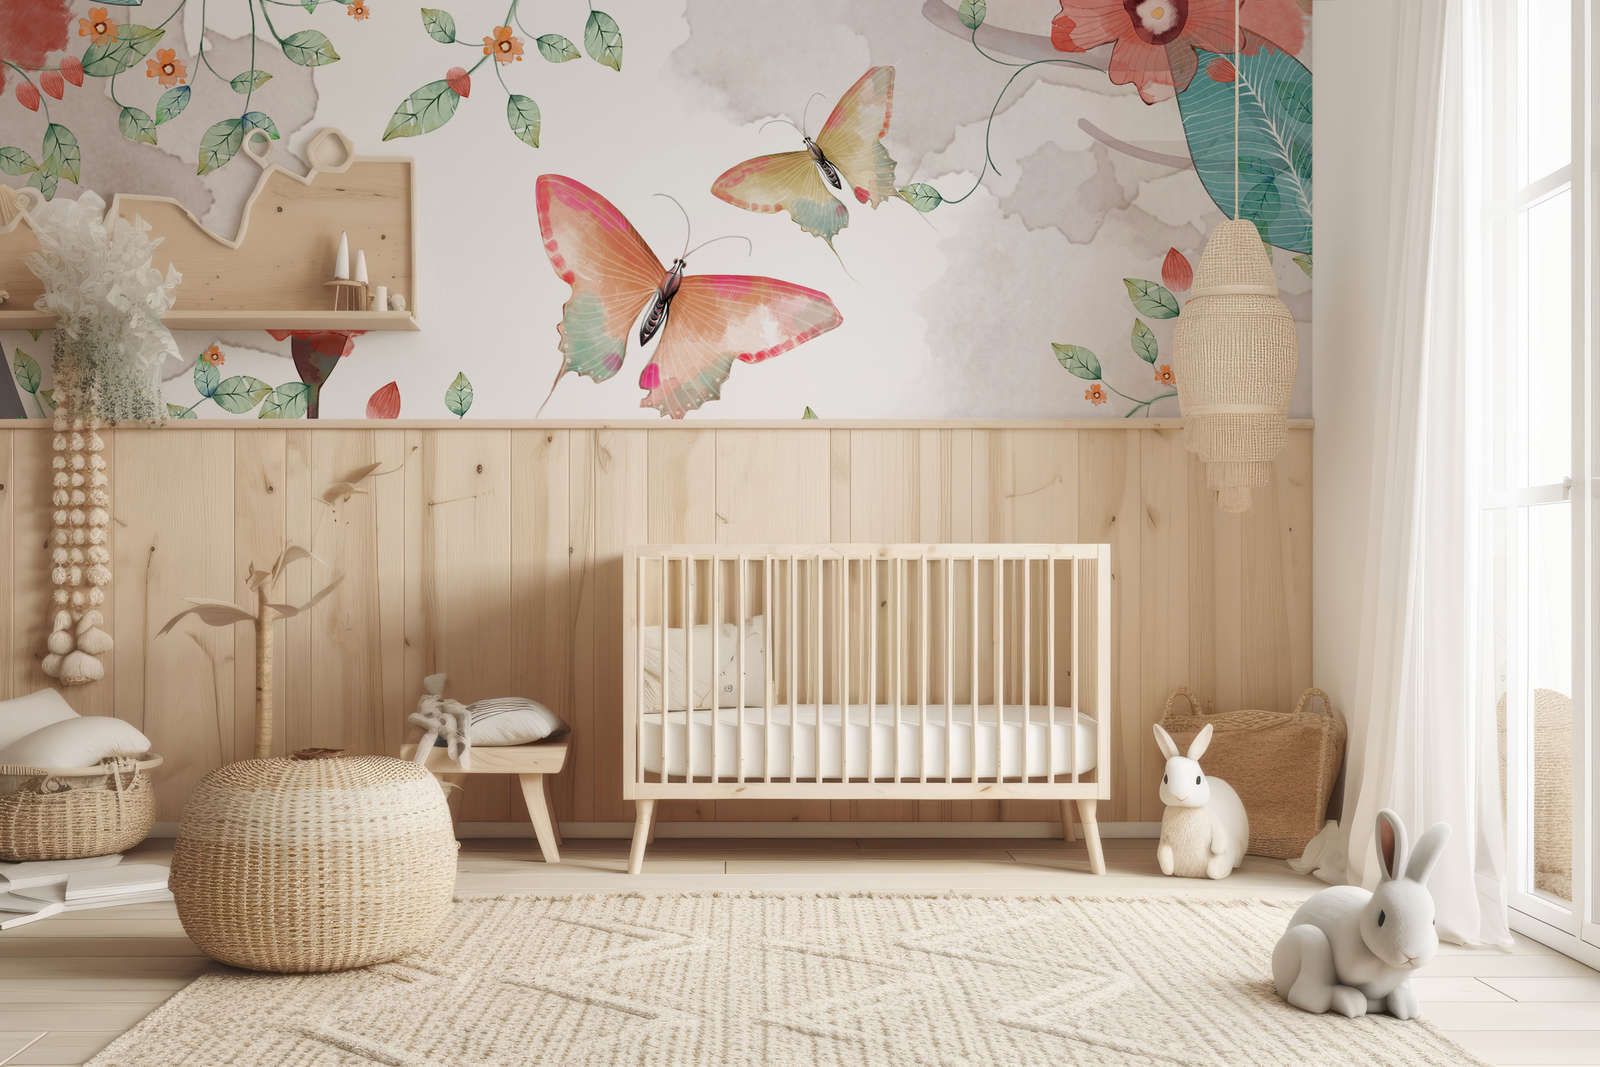             Photo wallpaper floral with leaves and butterflies - Smooth & matt non-woven
        